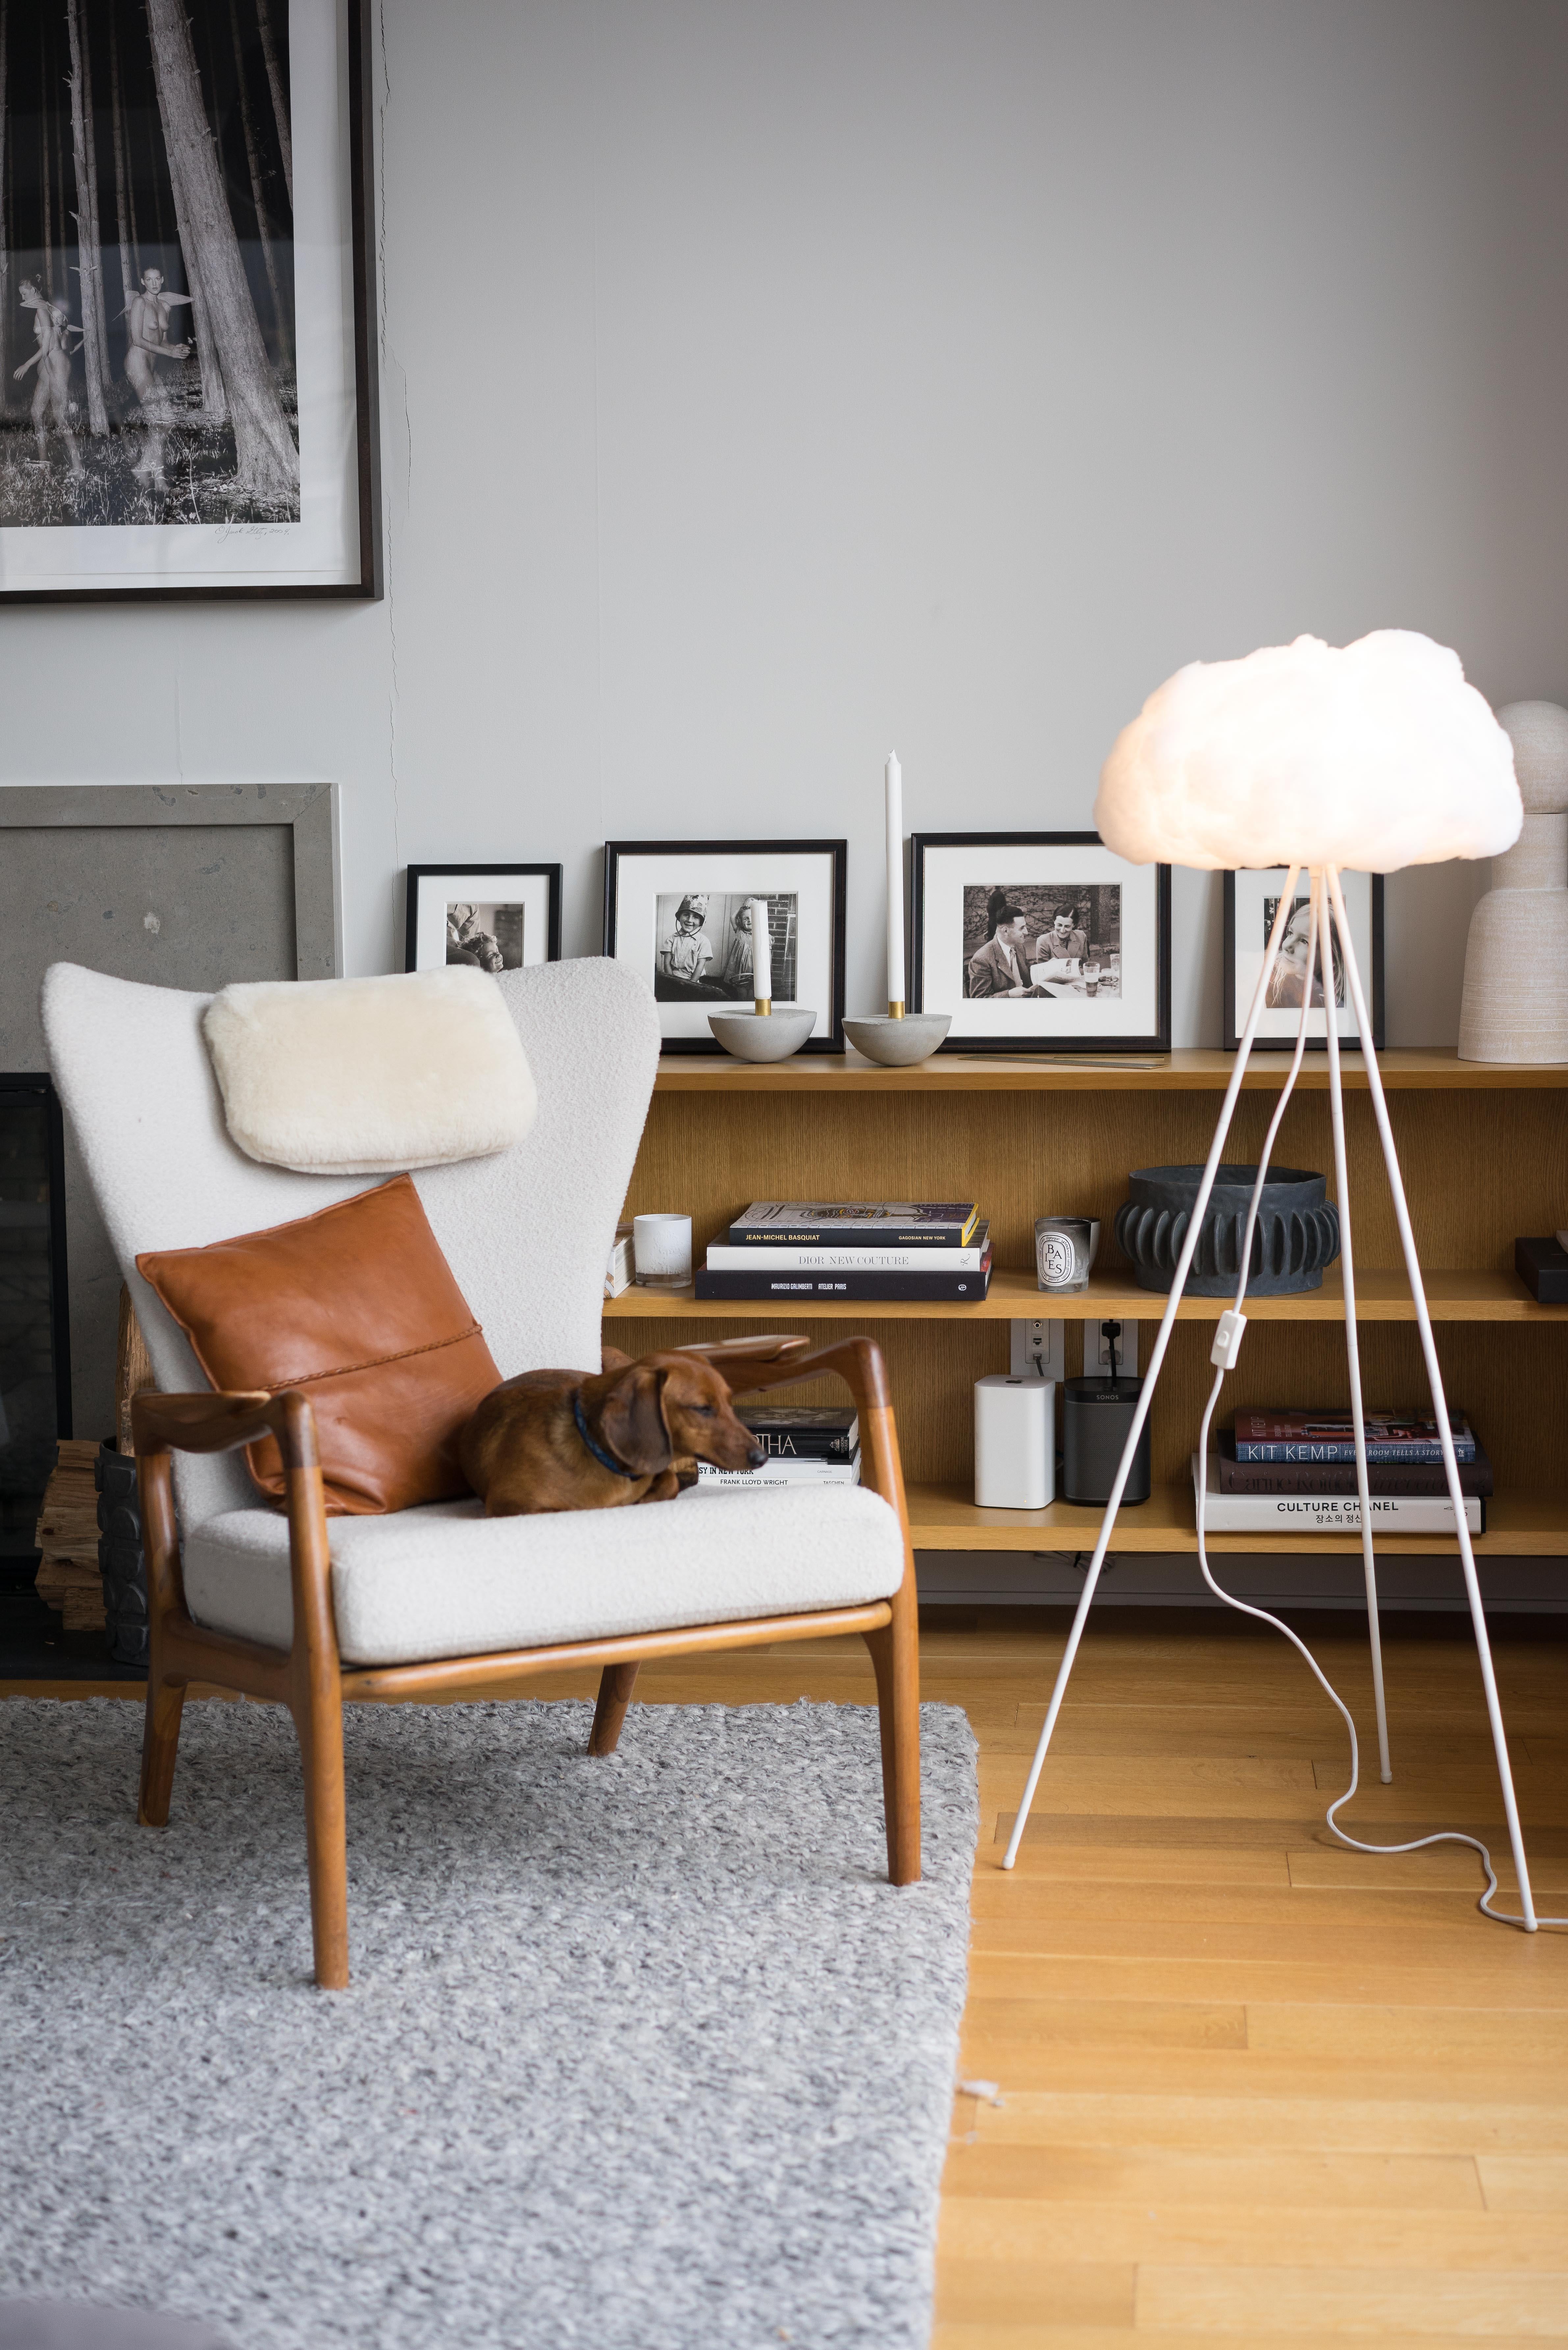 Your very own indoor cloud - a stunning floor standing light fixture that will be sure to bring a little sunshine to your space. A feature floor lamp that brings a little of the outside in - and being free standing it's super easy to set up or move